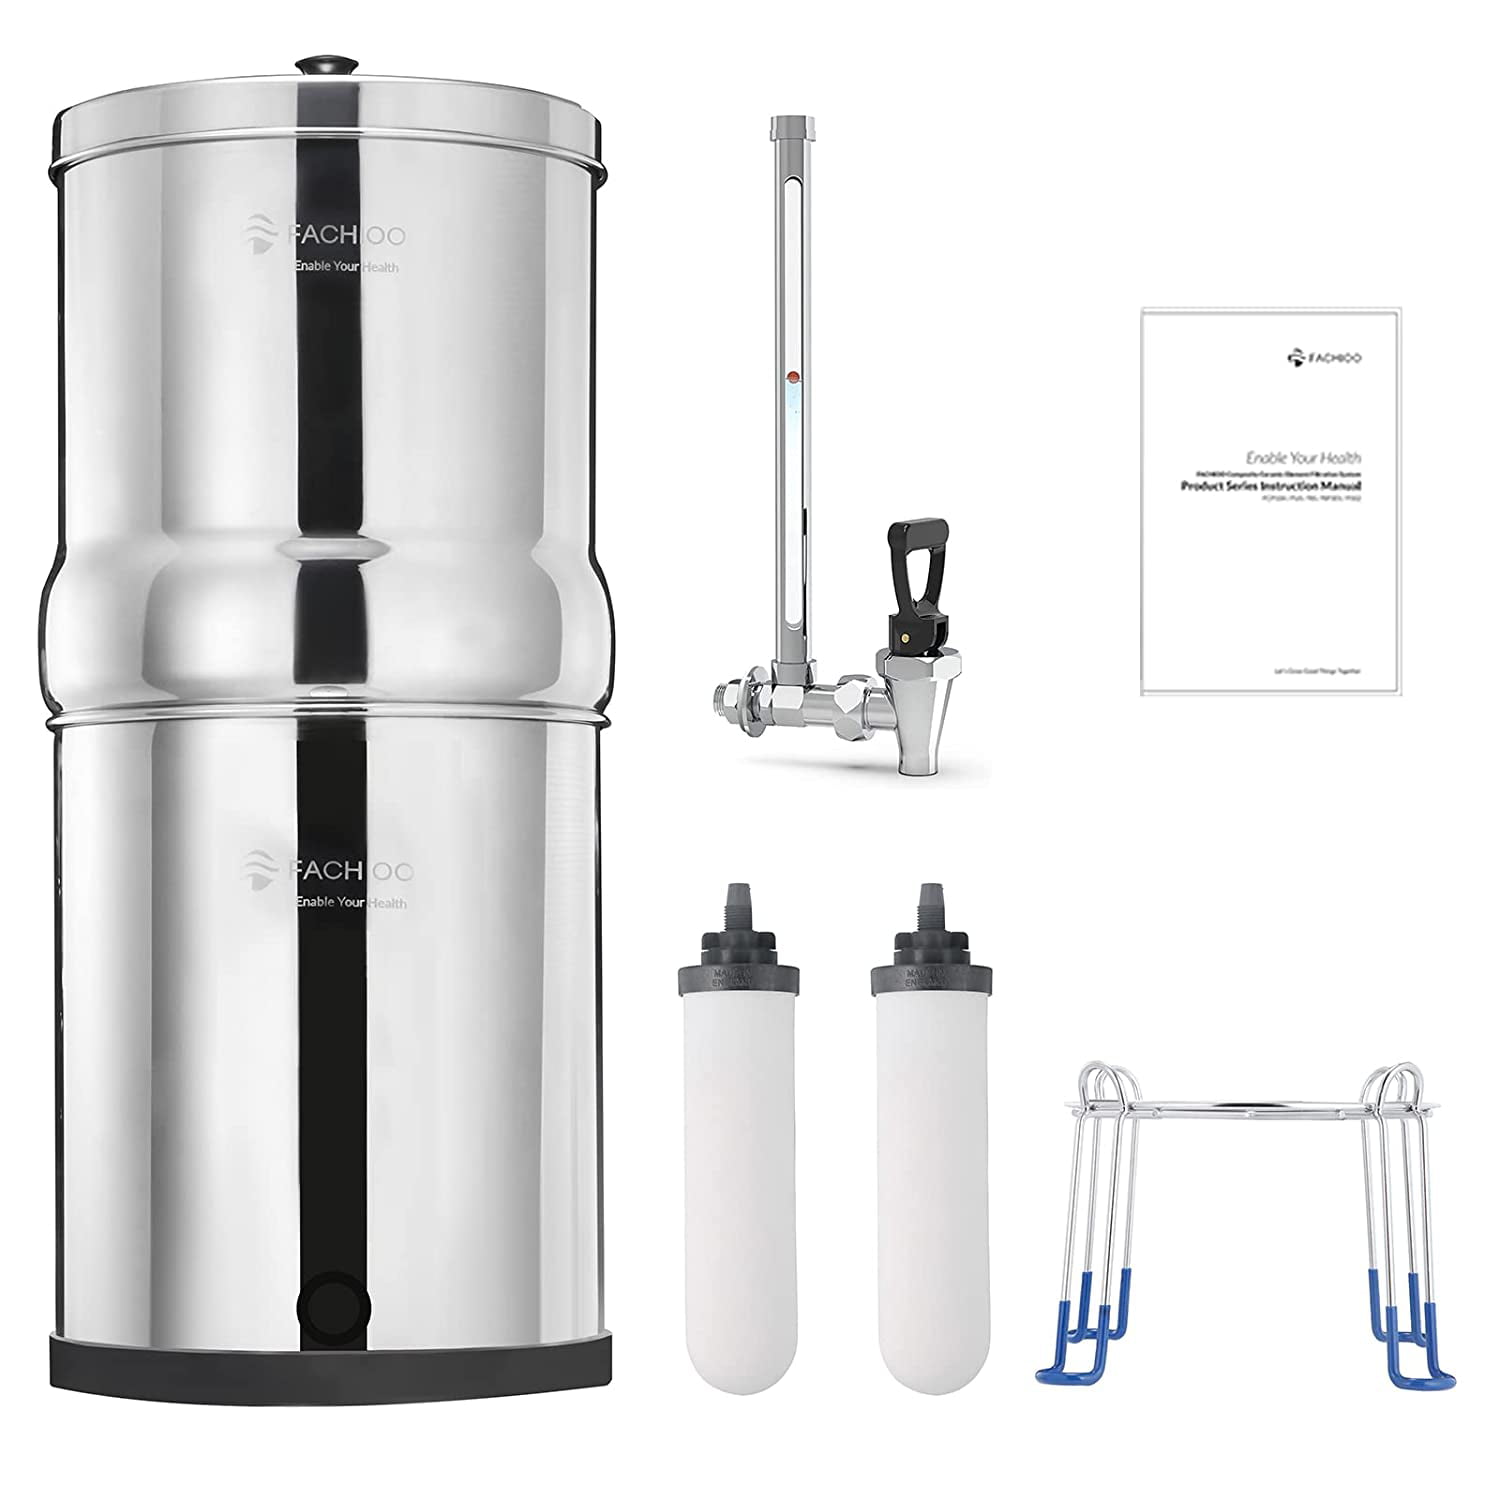 licens Mand materiale LLF Gravity-fed Water Filter System, 2.25 Gallon Stainless Steel Countertop  System with 2 Ceramics Filters Washable Filters, Metal Water Level Spigot  and Stand,Reduce up to 99% Chlorine - Walmart.com